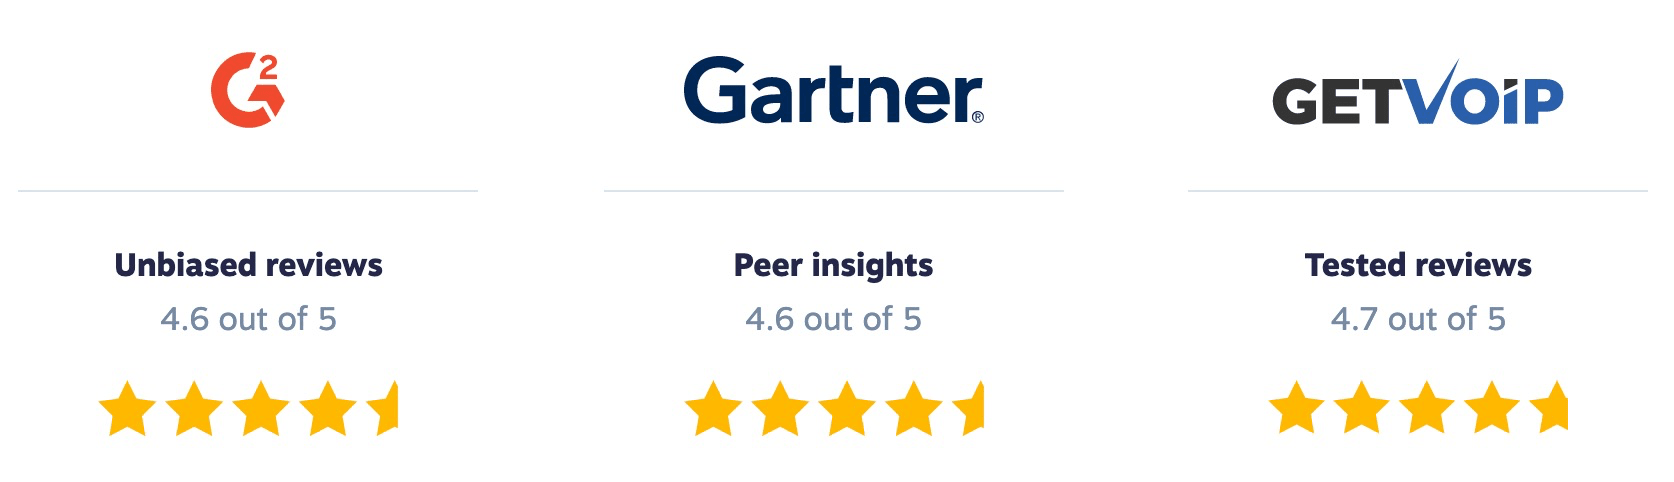 Nextiva reviews and ratings - G2 (4.6 out of 5), Gartner Peer Insights (4.6 out of 5), and GetVoIP (4.7 out of 5).